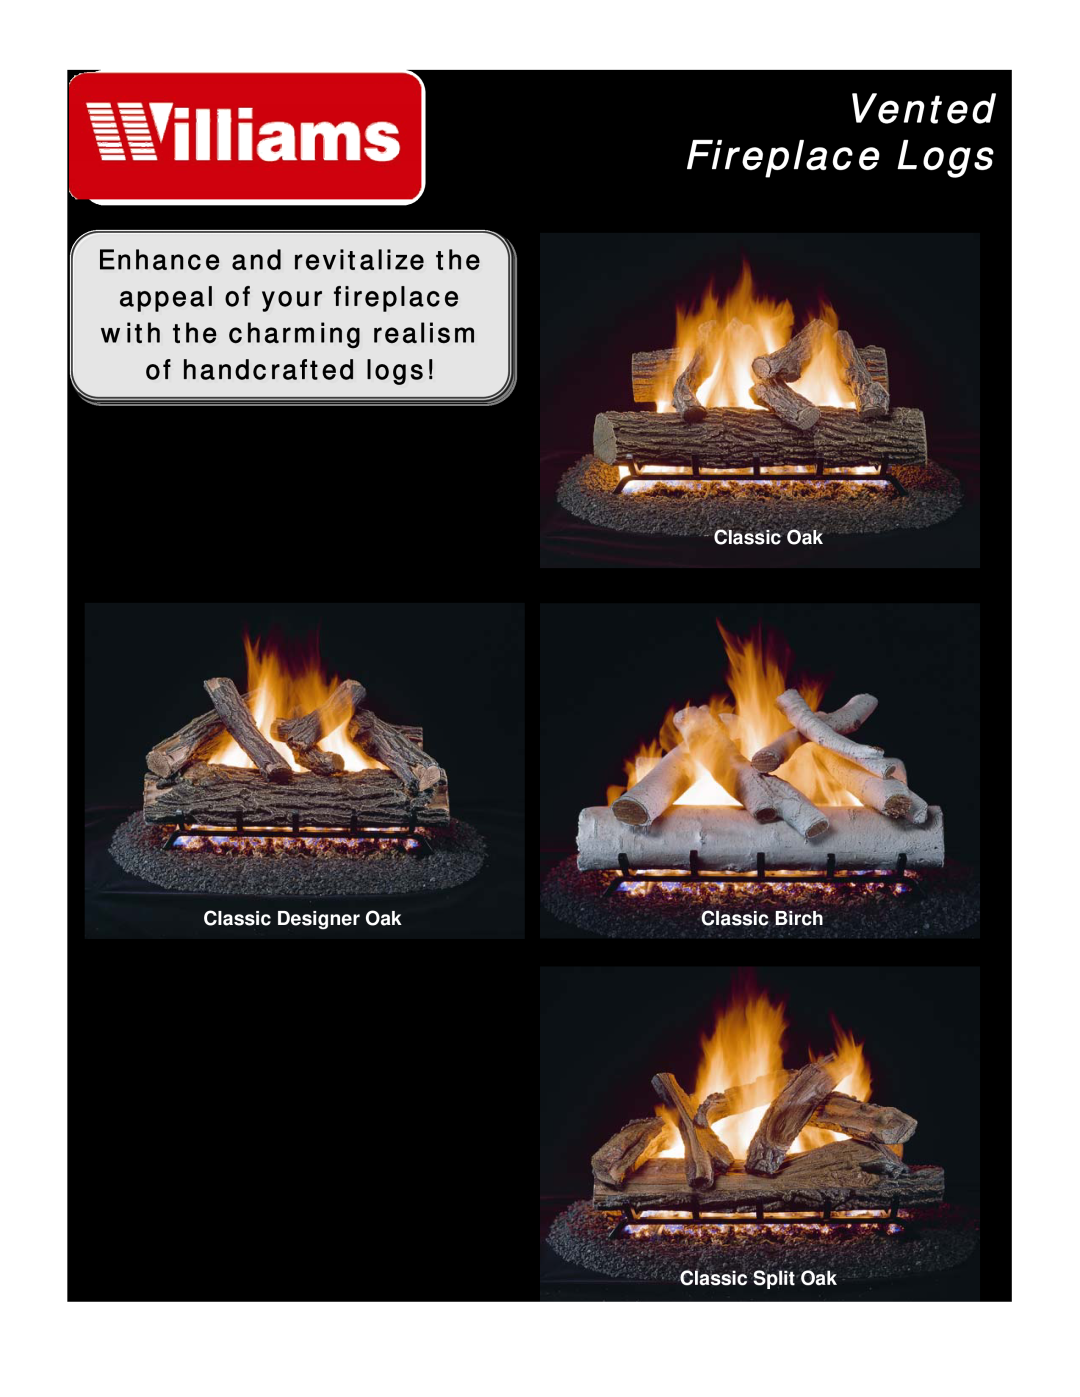 Williams 4261, 4236 manual Vented Fireplace Logs, Design Features, off handcraftedr ft logs!l, ‰Eliminates costly firewood 